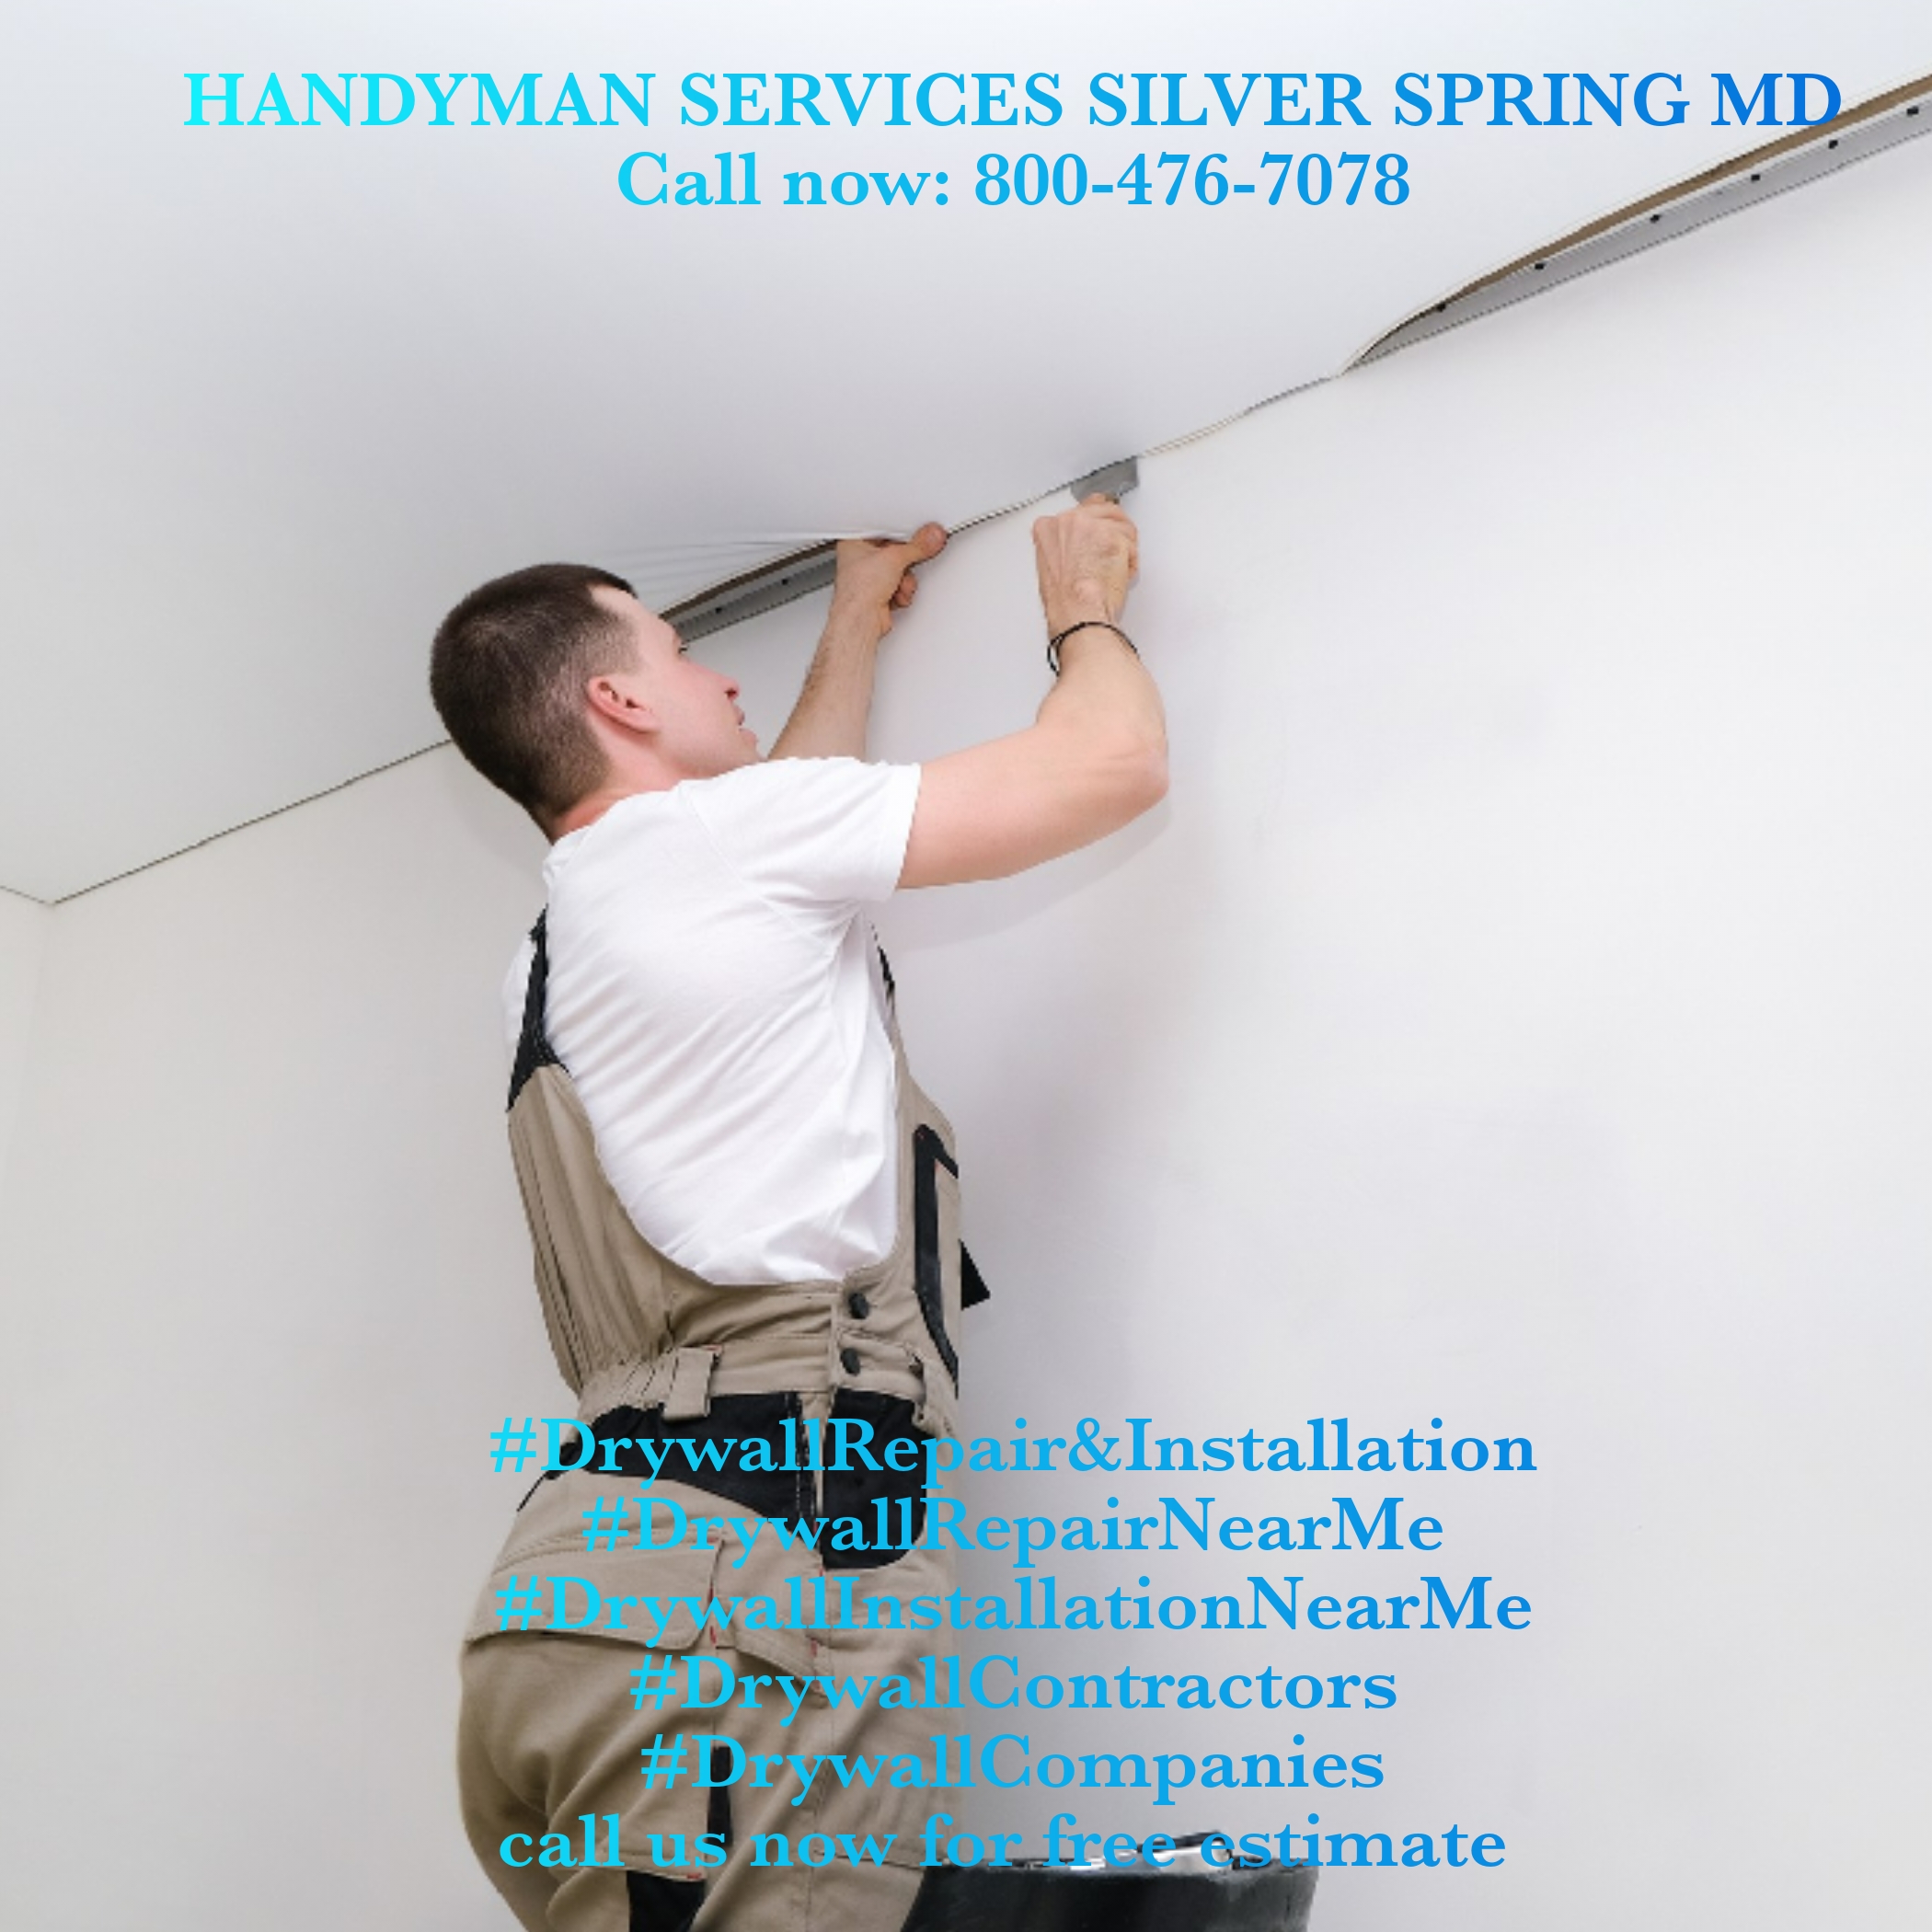 Why leave drywall repair & installation job to professionals?